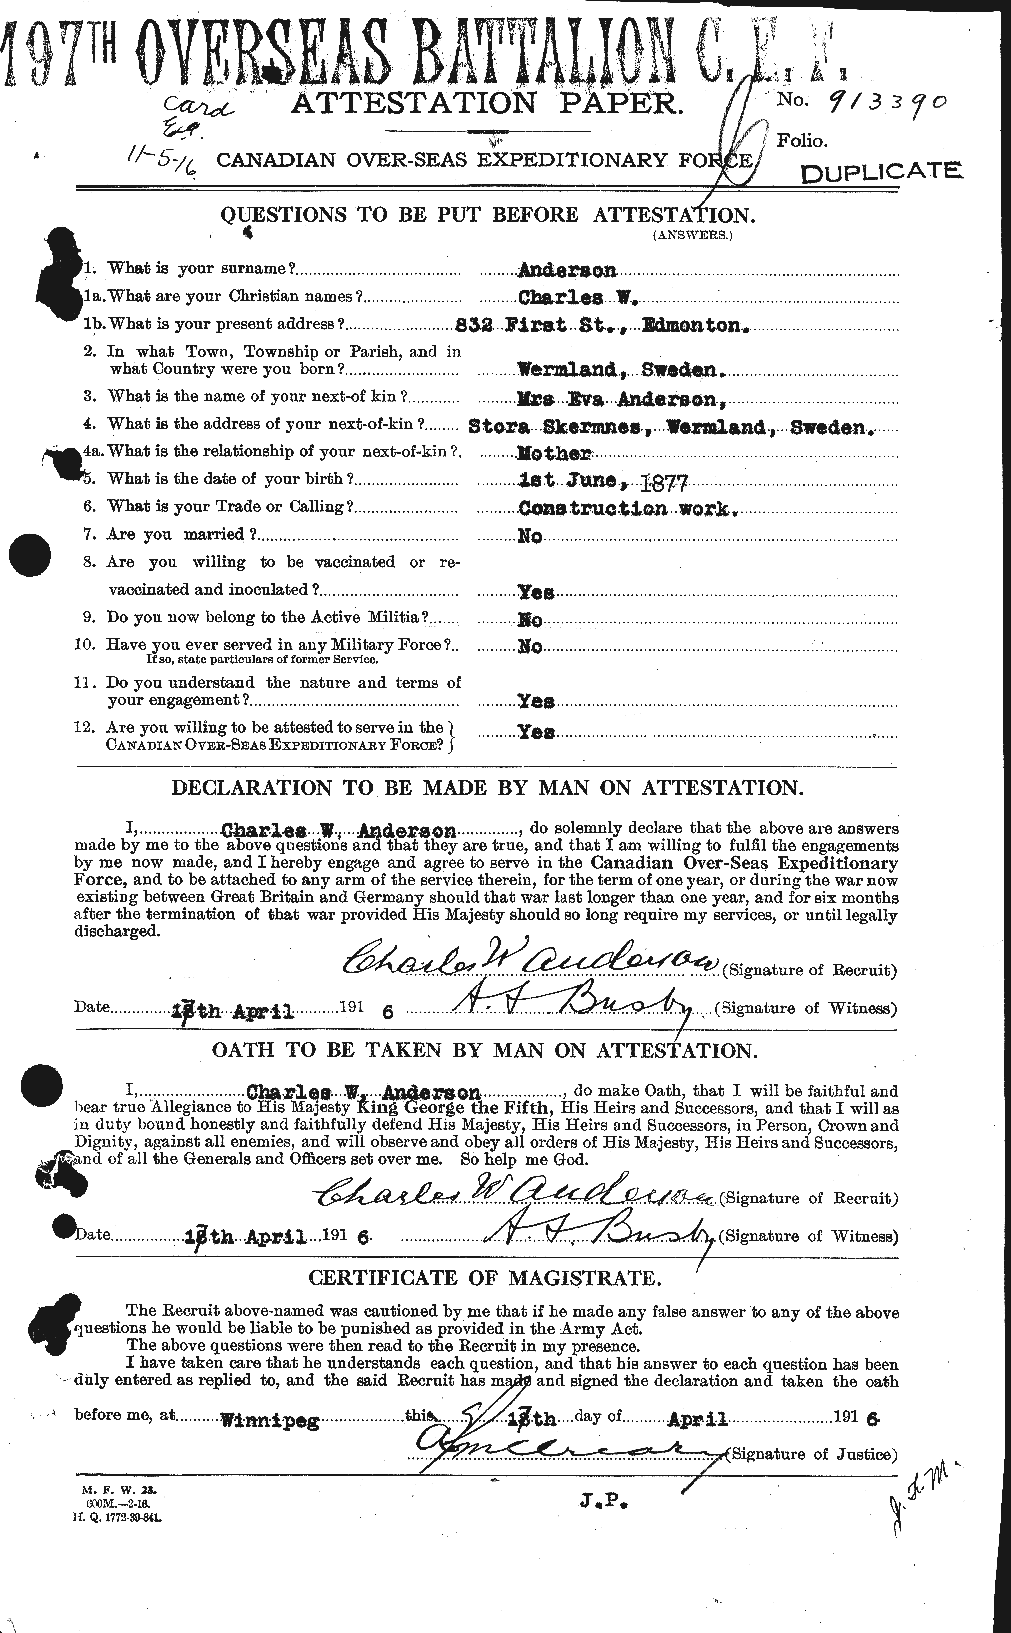 Personnel Records of the First World War - CEF 209223a